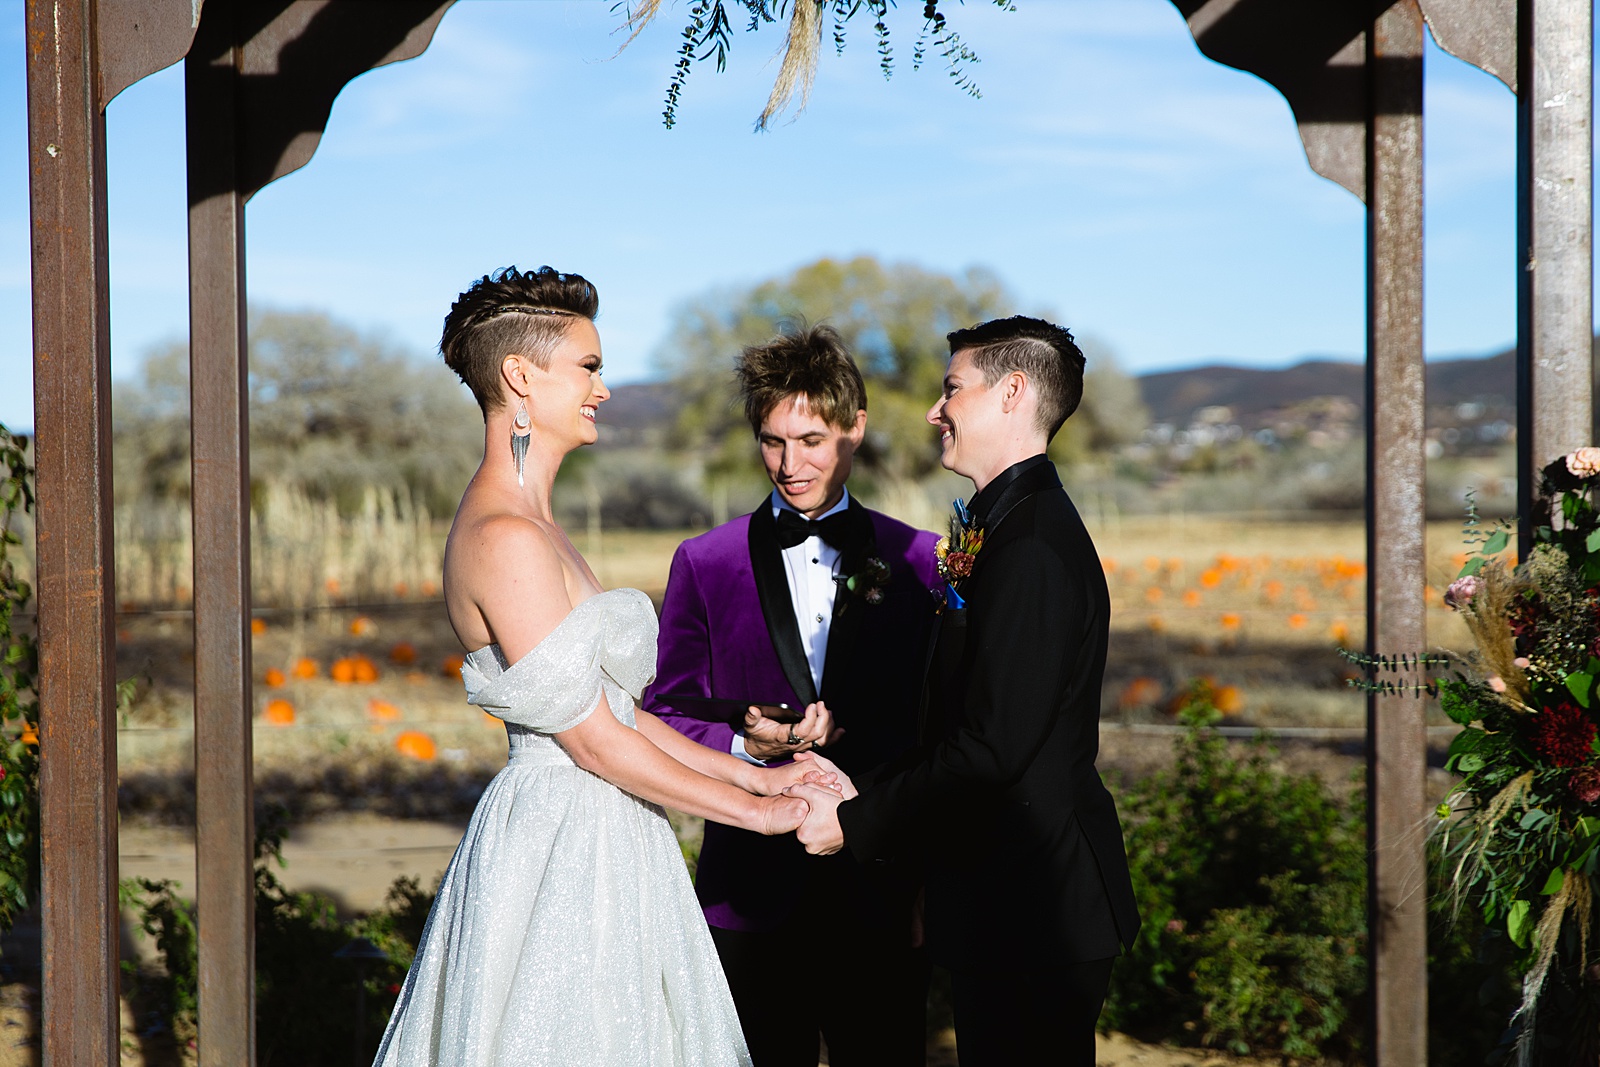 Same sex couple exchange vows during their Mortimer Farms wedding ceremony by Prescott wedding photographer PMA Photography.